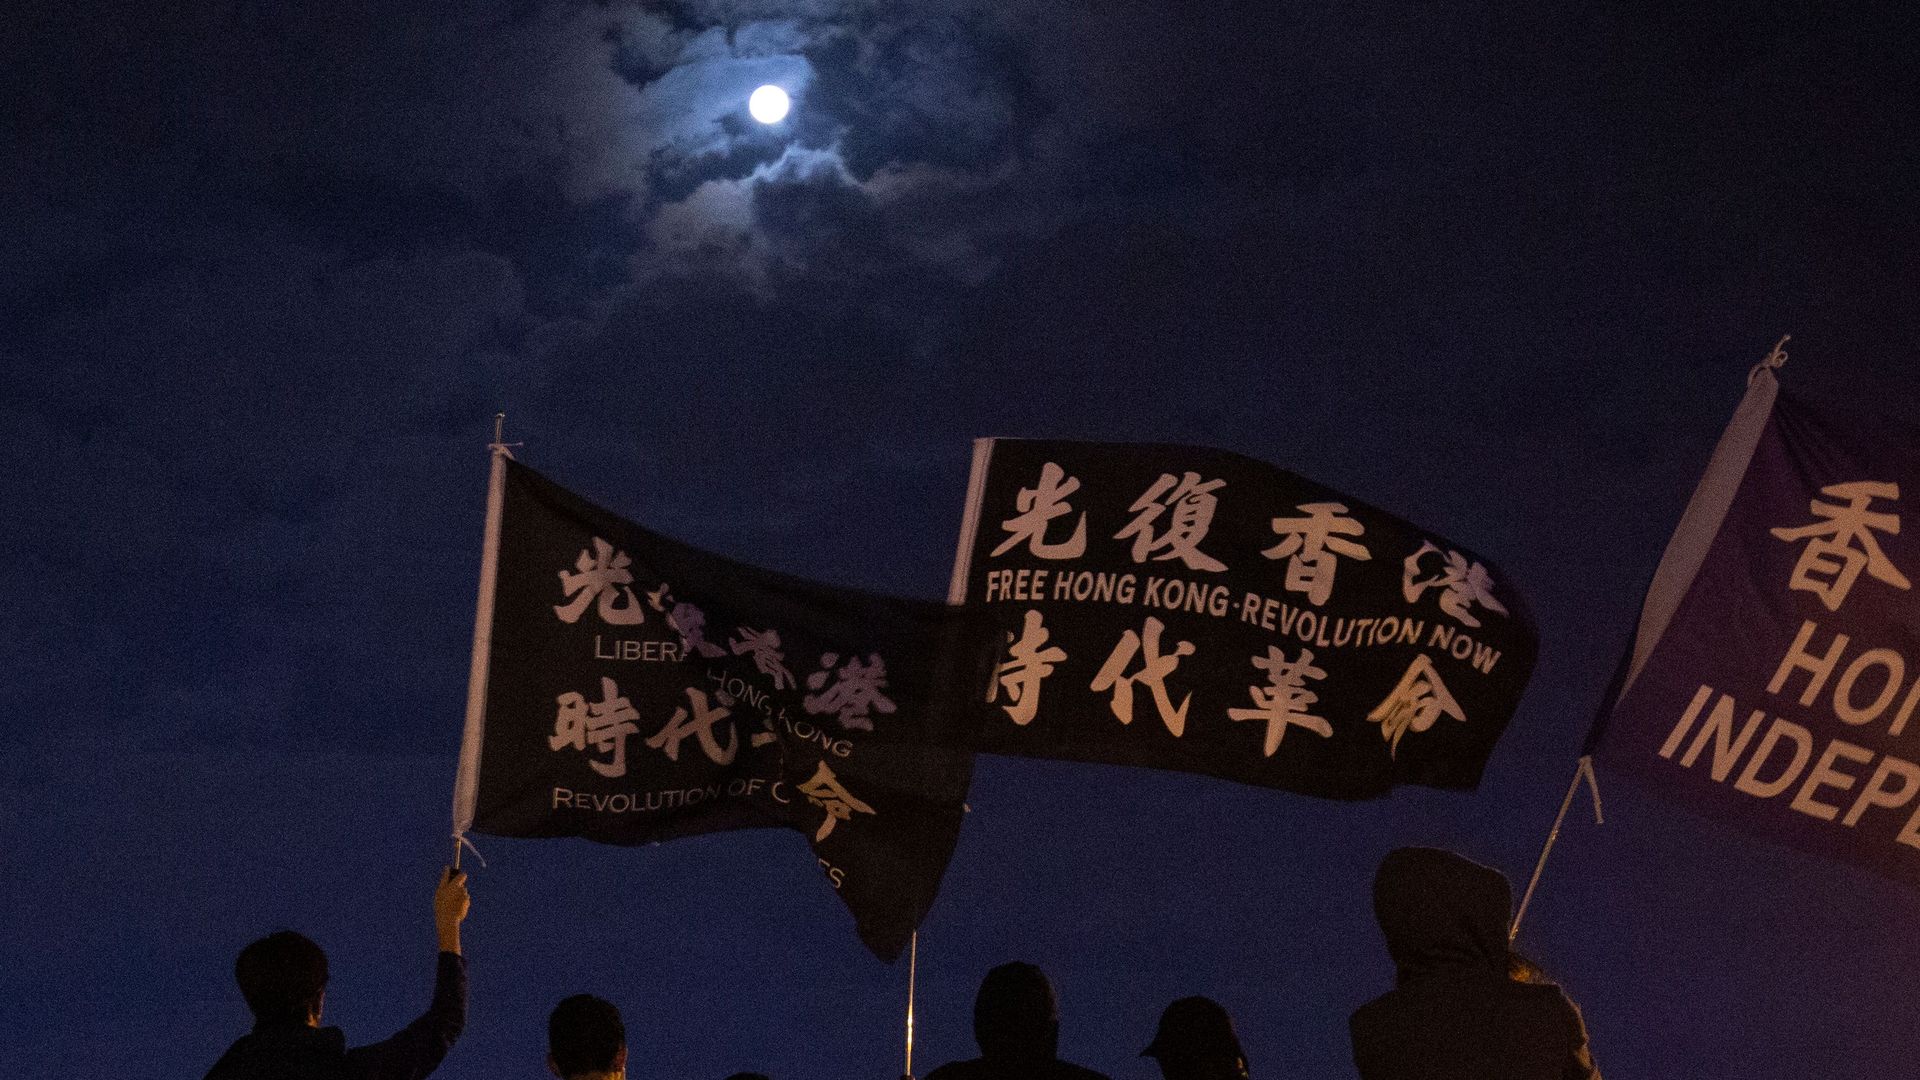 This photo taken on December 12, 2019 shows protesters waving black flags